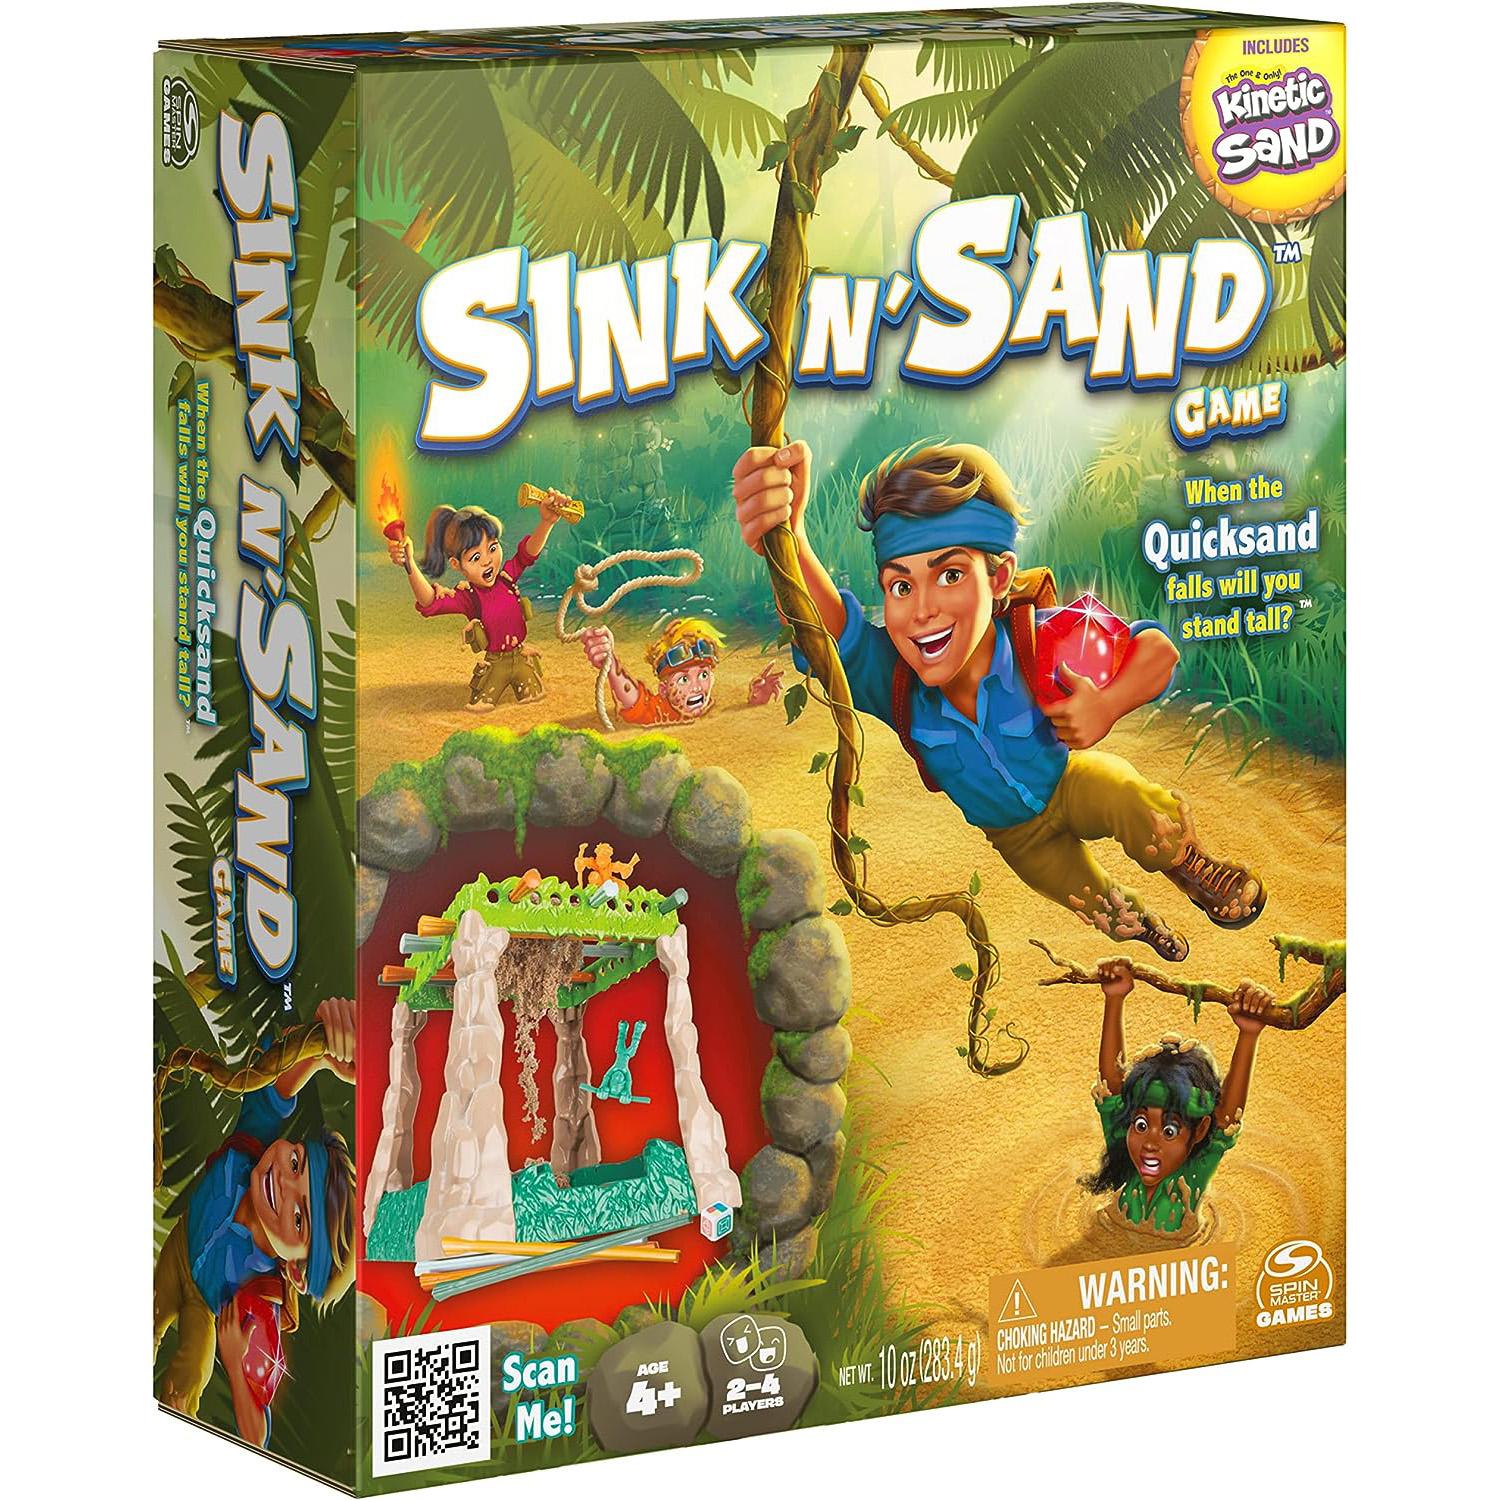 Spin Master Sink N Sand Board Game for $8.99